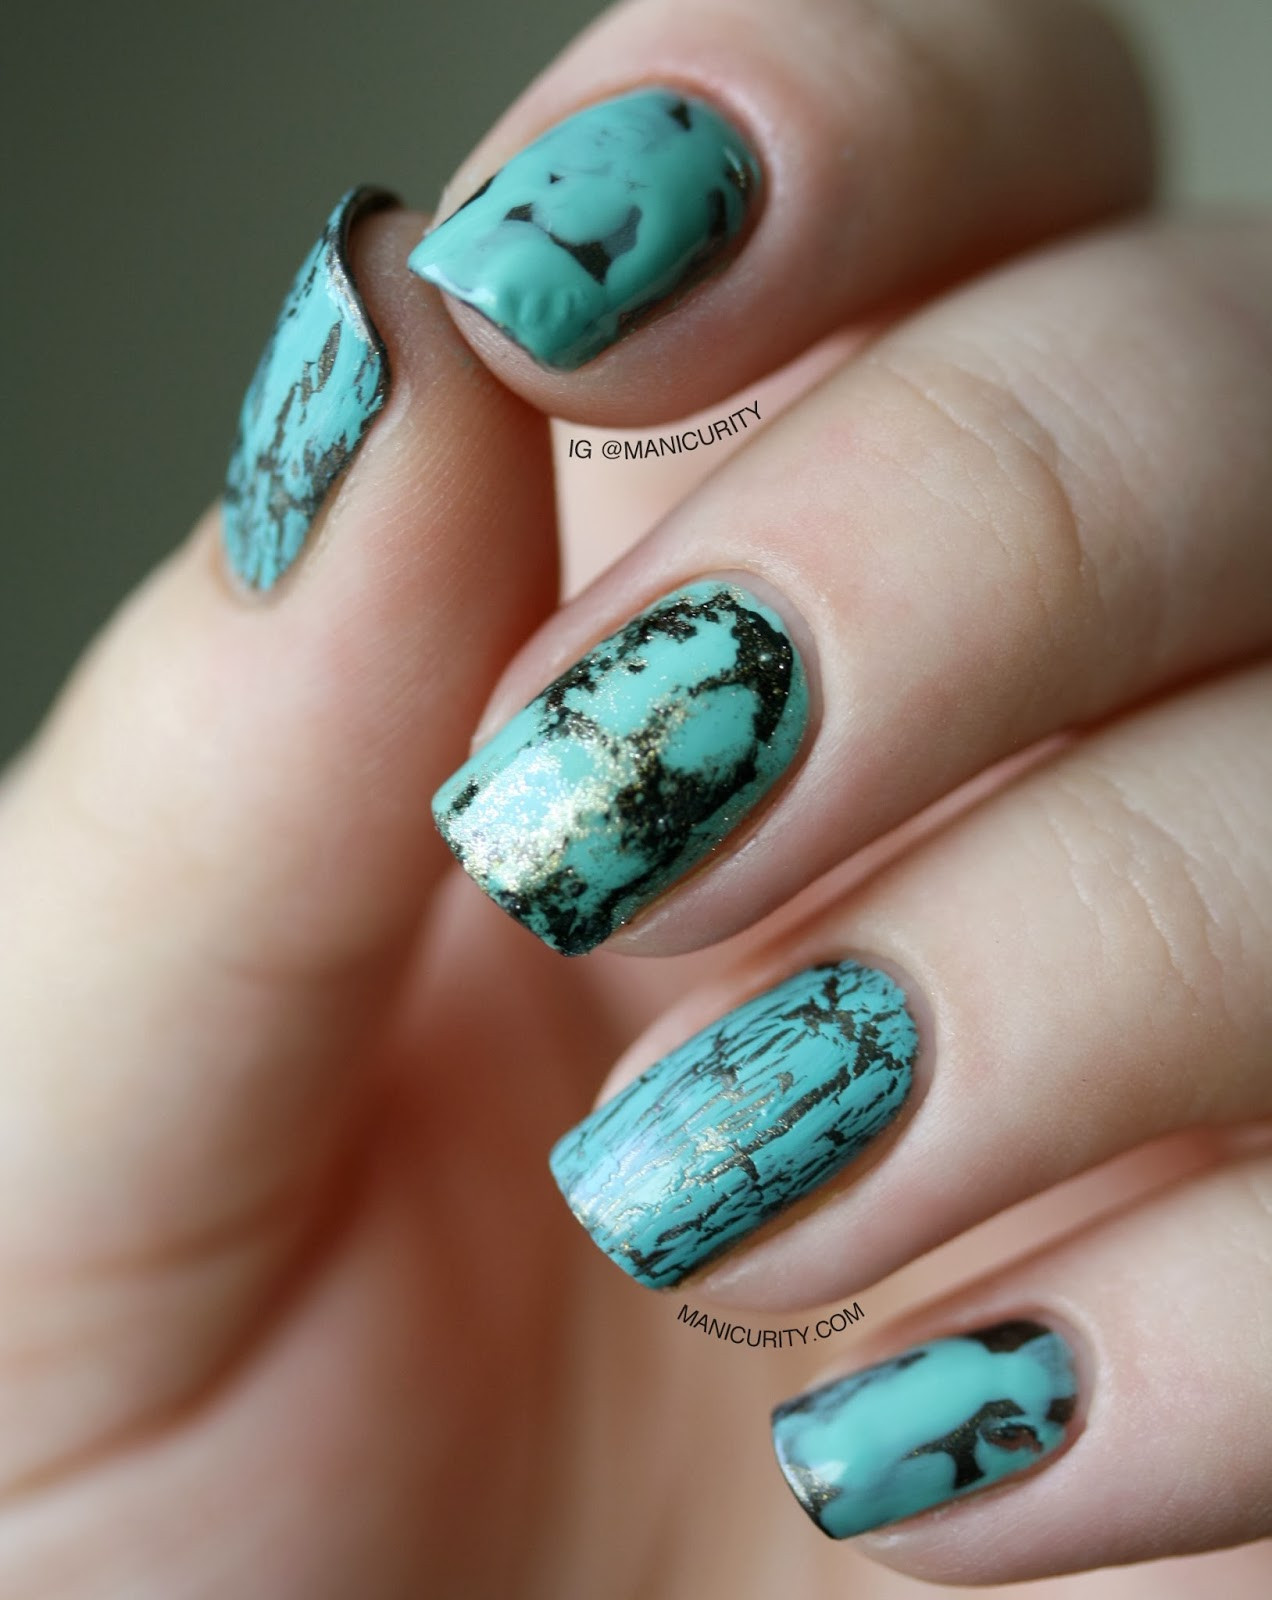 Turquoise Nail Designs
 Manicurity TBT Turquoise Birthstone Nail Art